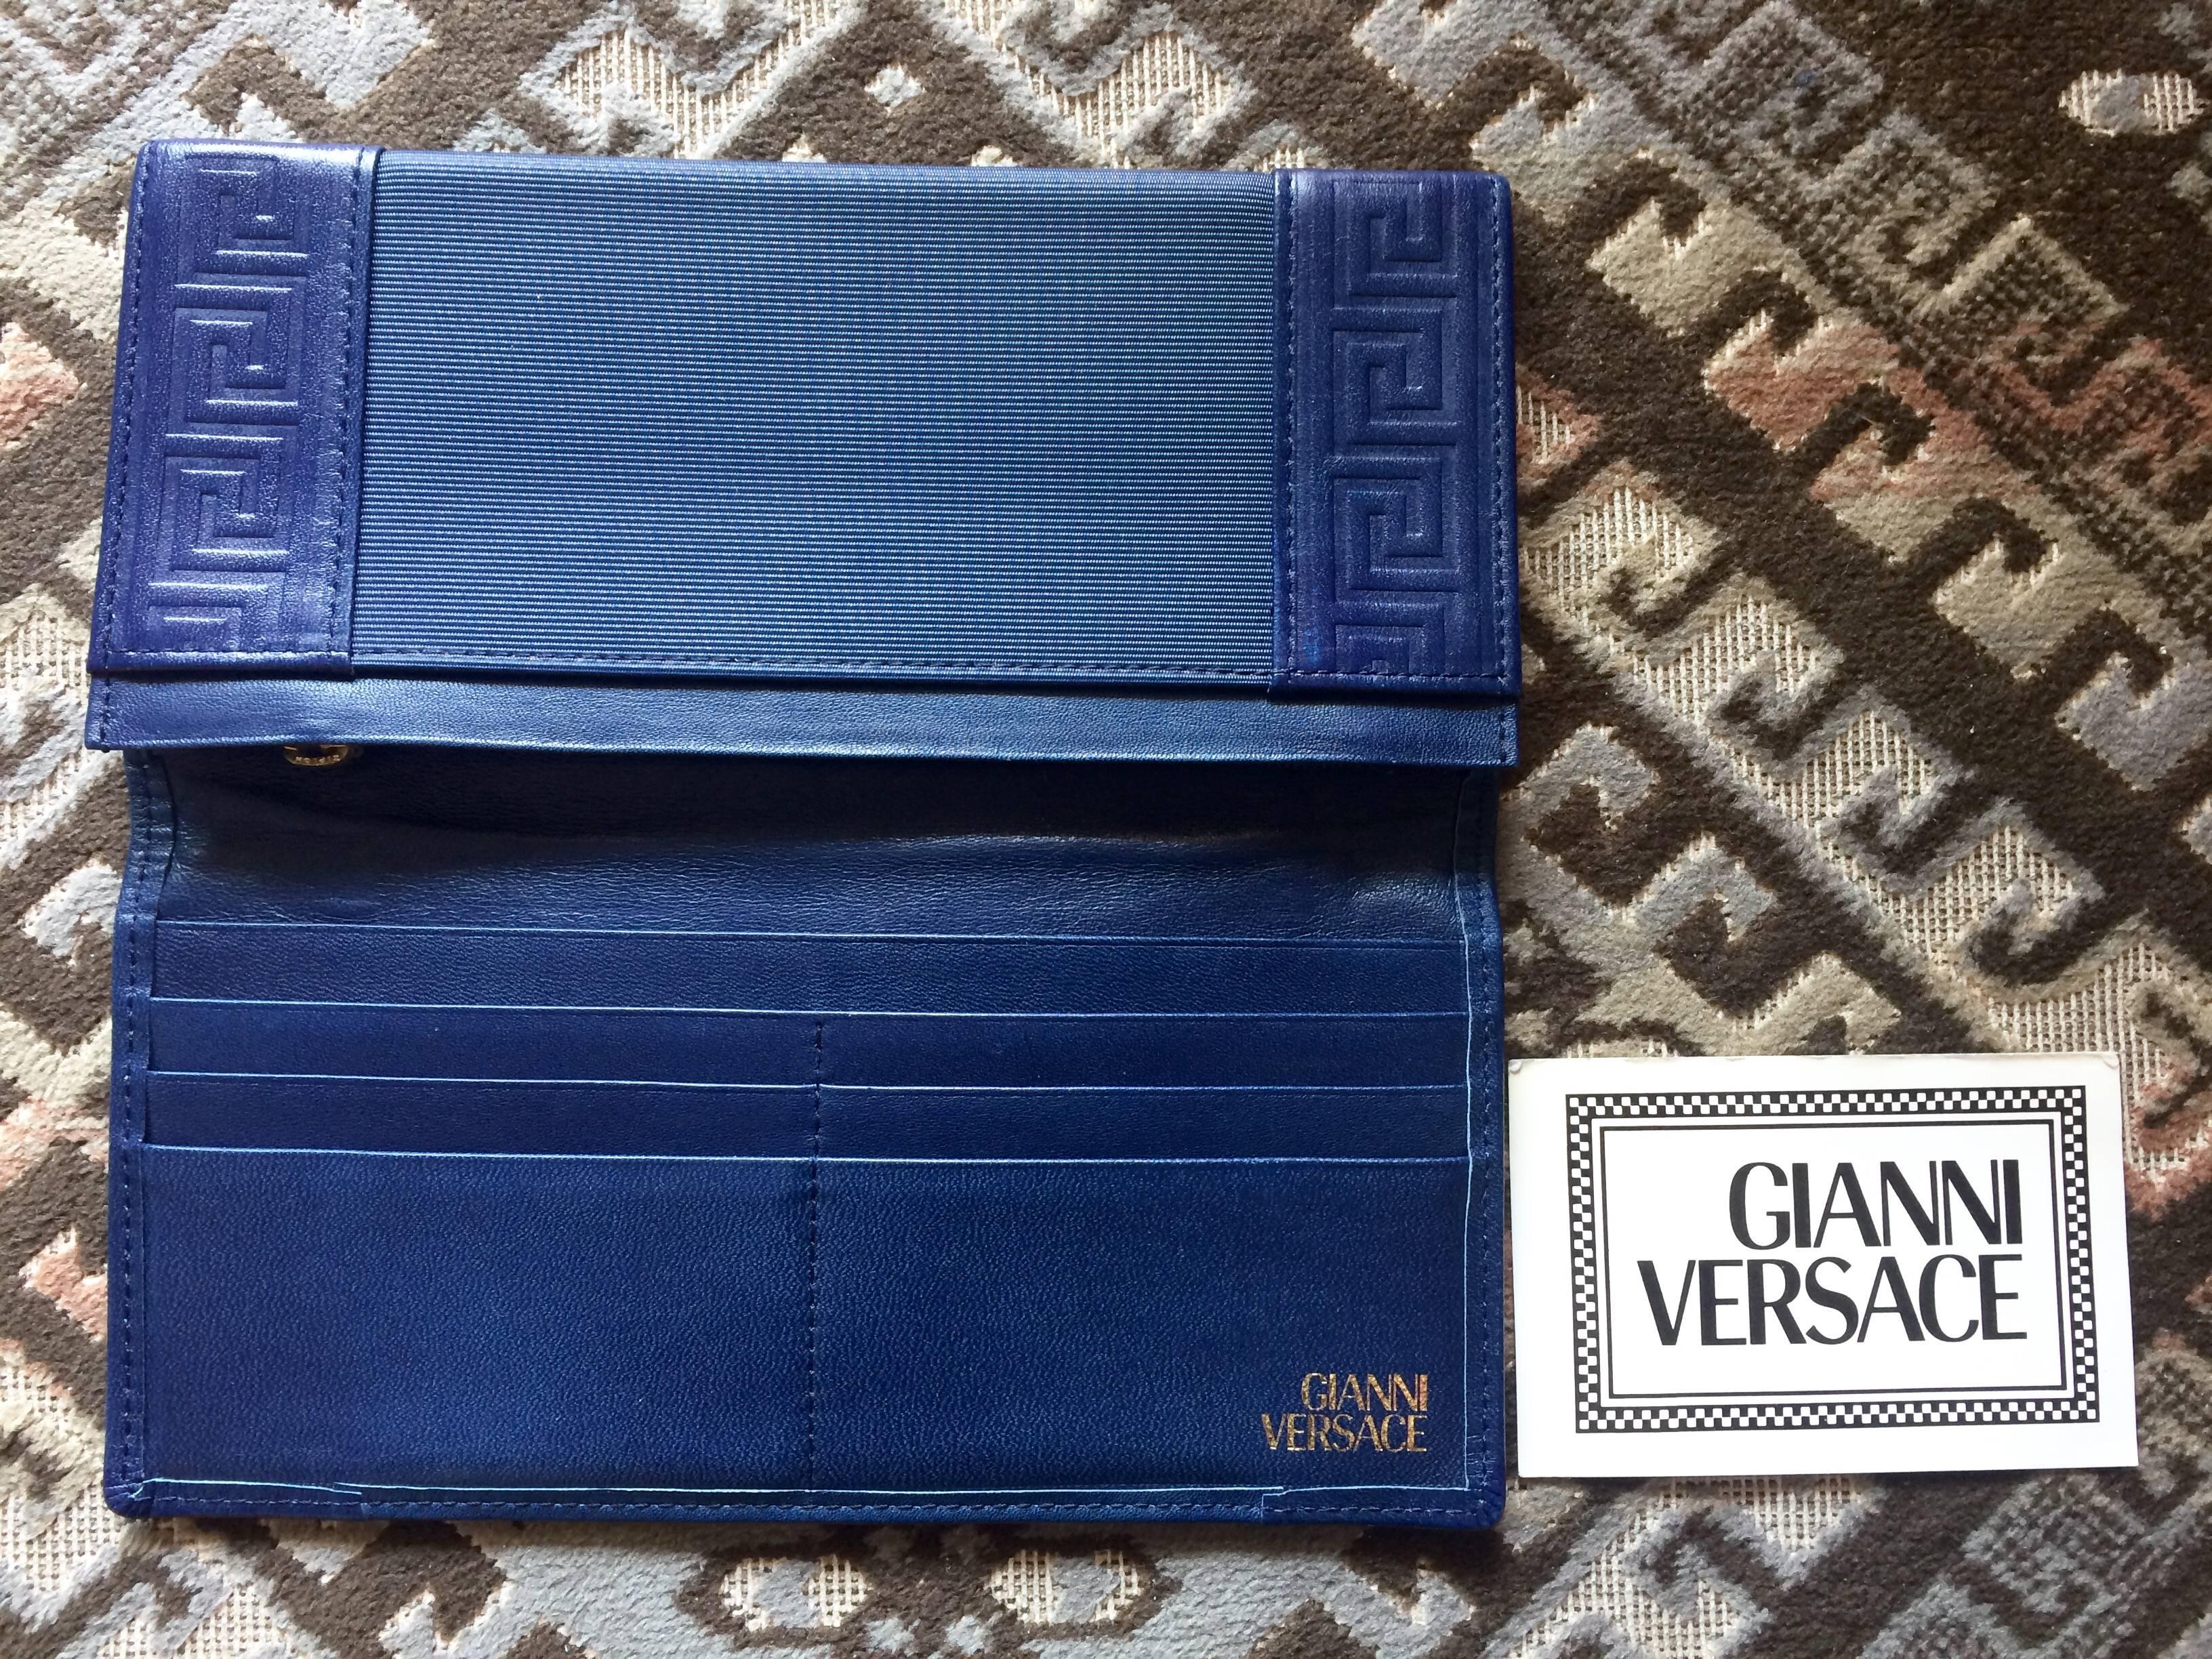 Vintage Gianni Versace blue wallet with geometric pattern and logo round motif. 2